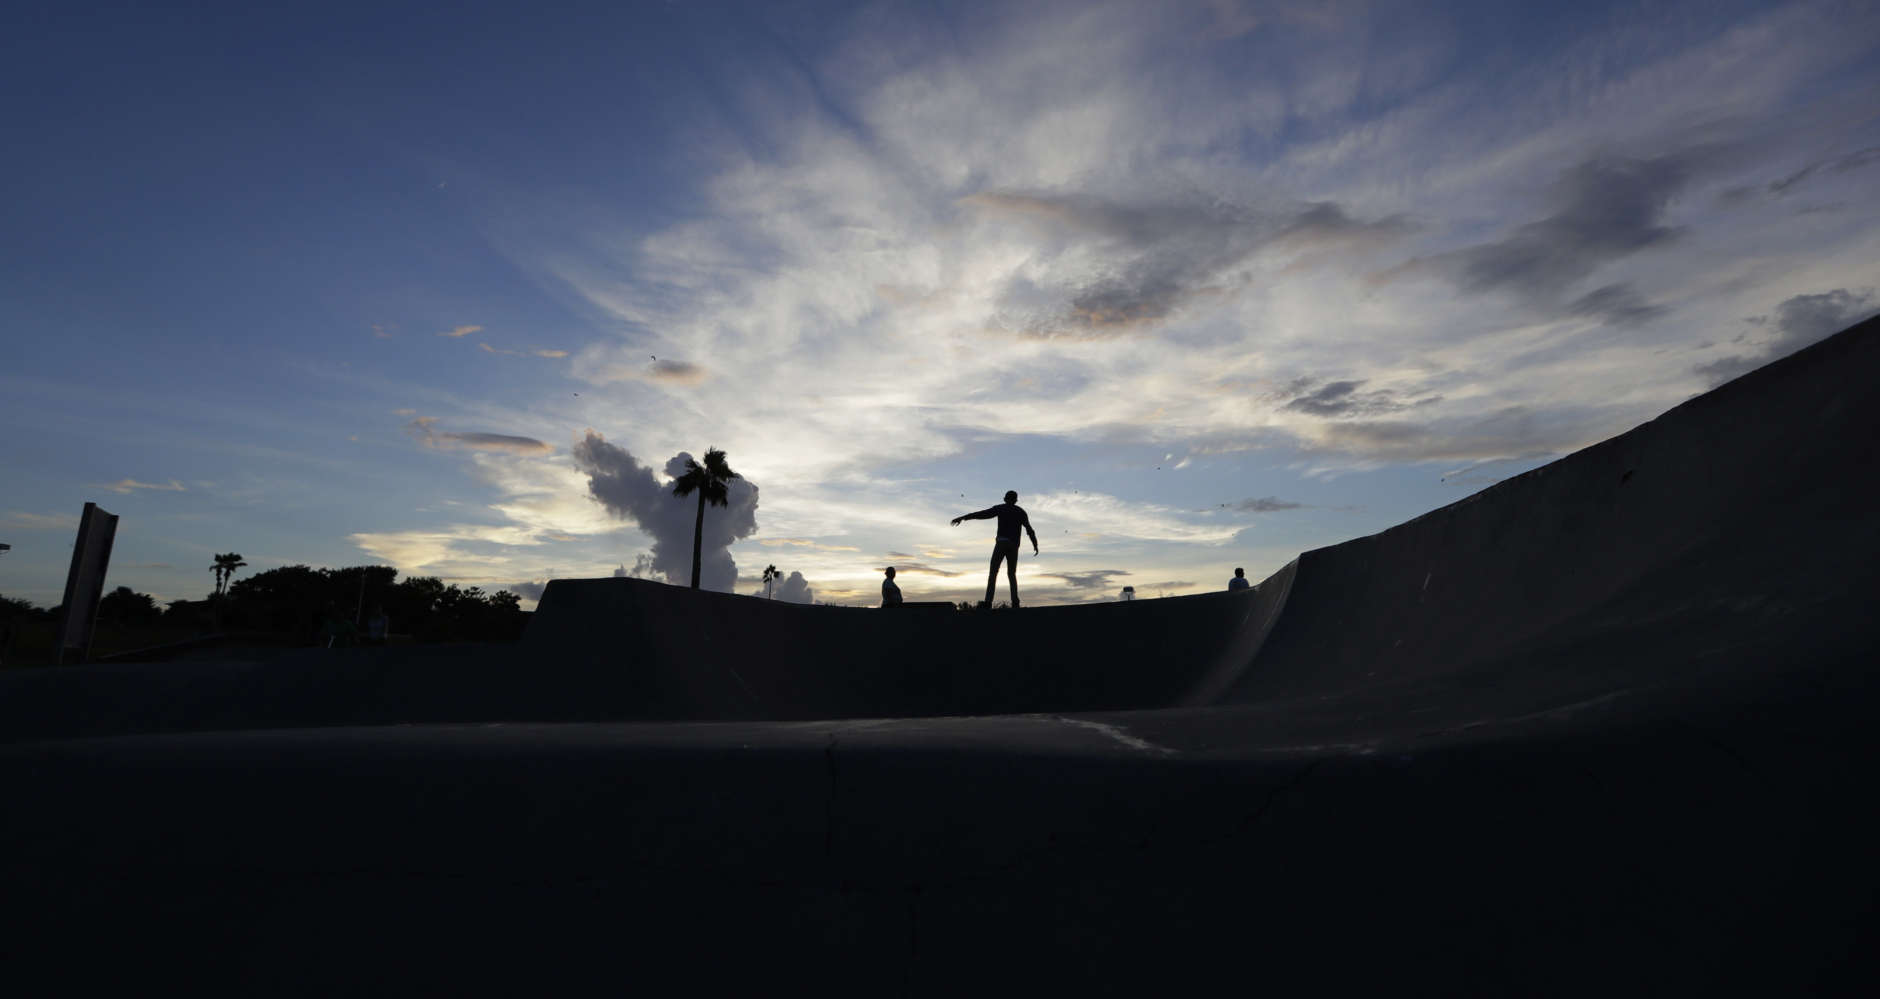 Jake High rides his skateboard at sunset, Thursday, Aug. 24, 2017, in Corpus Christi, Texas. Harvey intensified into a hurricane Thursday and steered for the Texas coast with the potential for up to 3 feet of rain, 125 mph winds and 12-foot storm surges in what could be the fiercest hurricane to hit the United States in almost a dozen years. (AP Photo/Eric Gay)